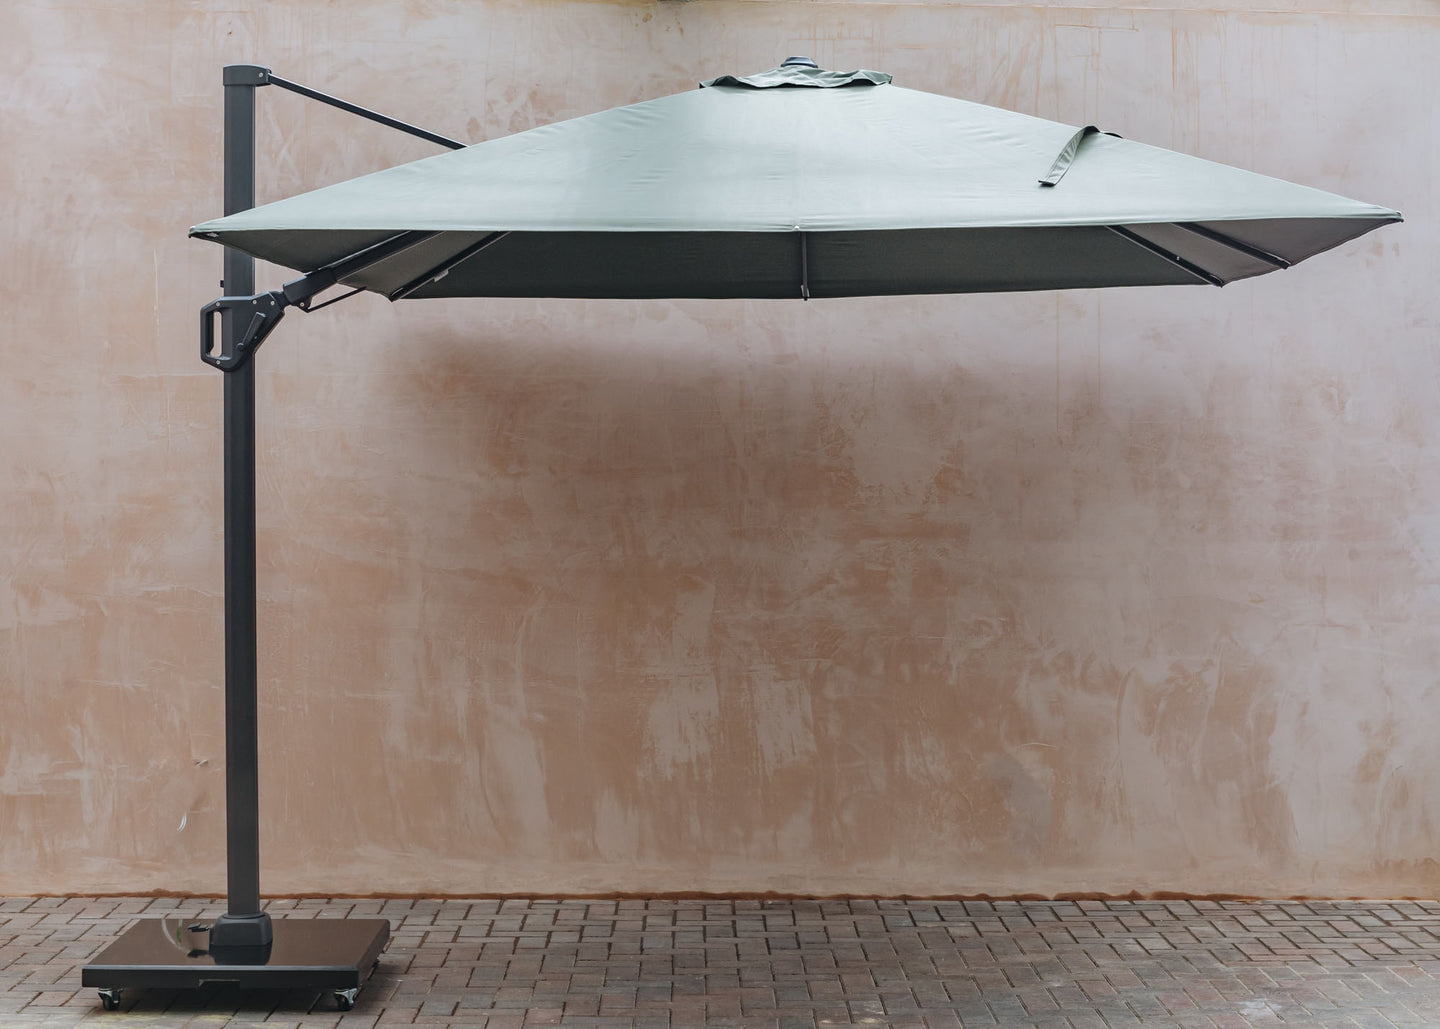 T2 Challenger Square Free Arm Parasol in Olive (3mx3m)